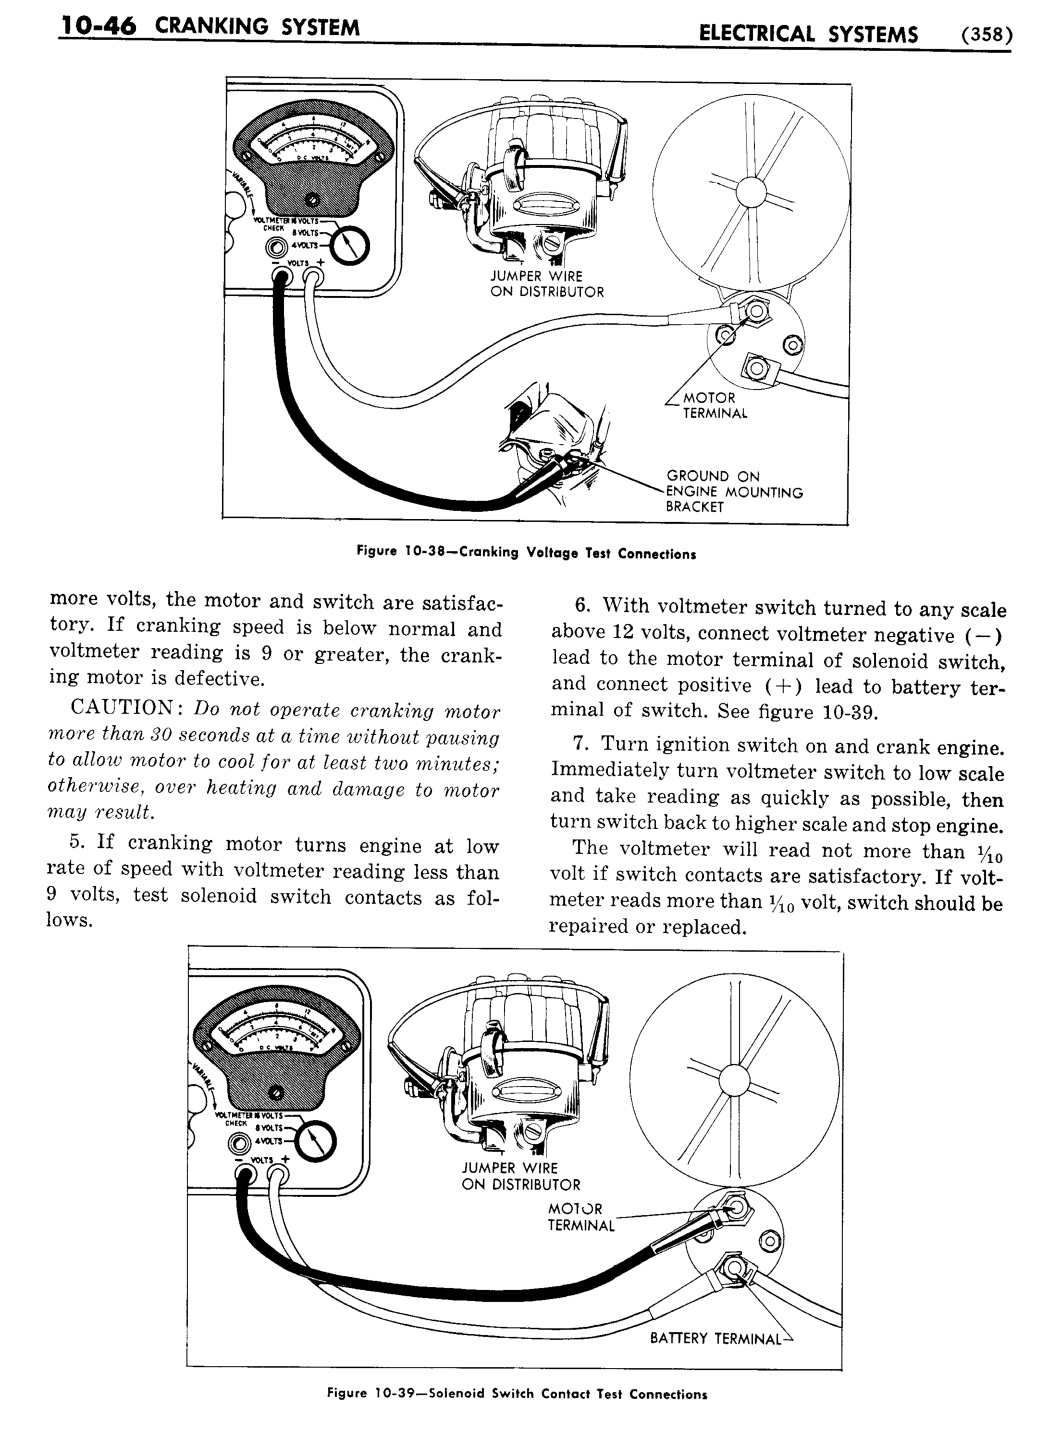 n_11 1954 Buick Shop Manual - Electrical Systems-046-046.jpg